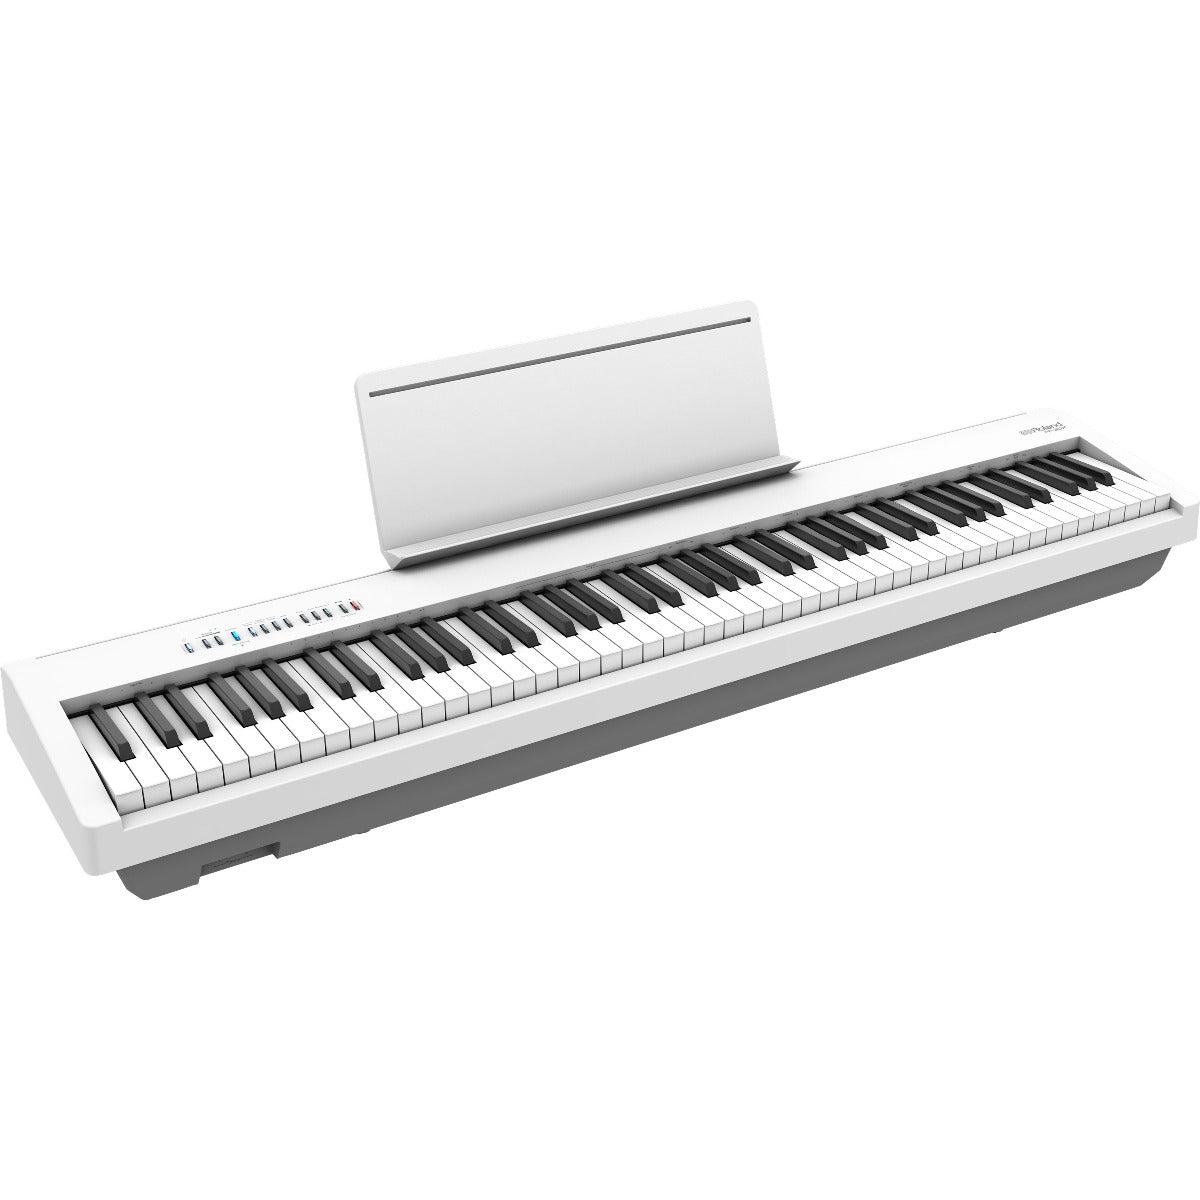 Roland KSC-70 Stand for FP-30 and FP-30X Digital Pianos